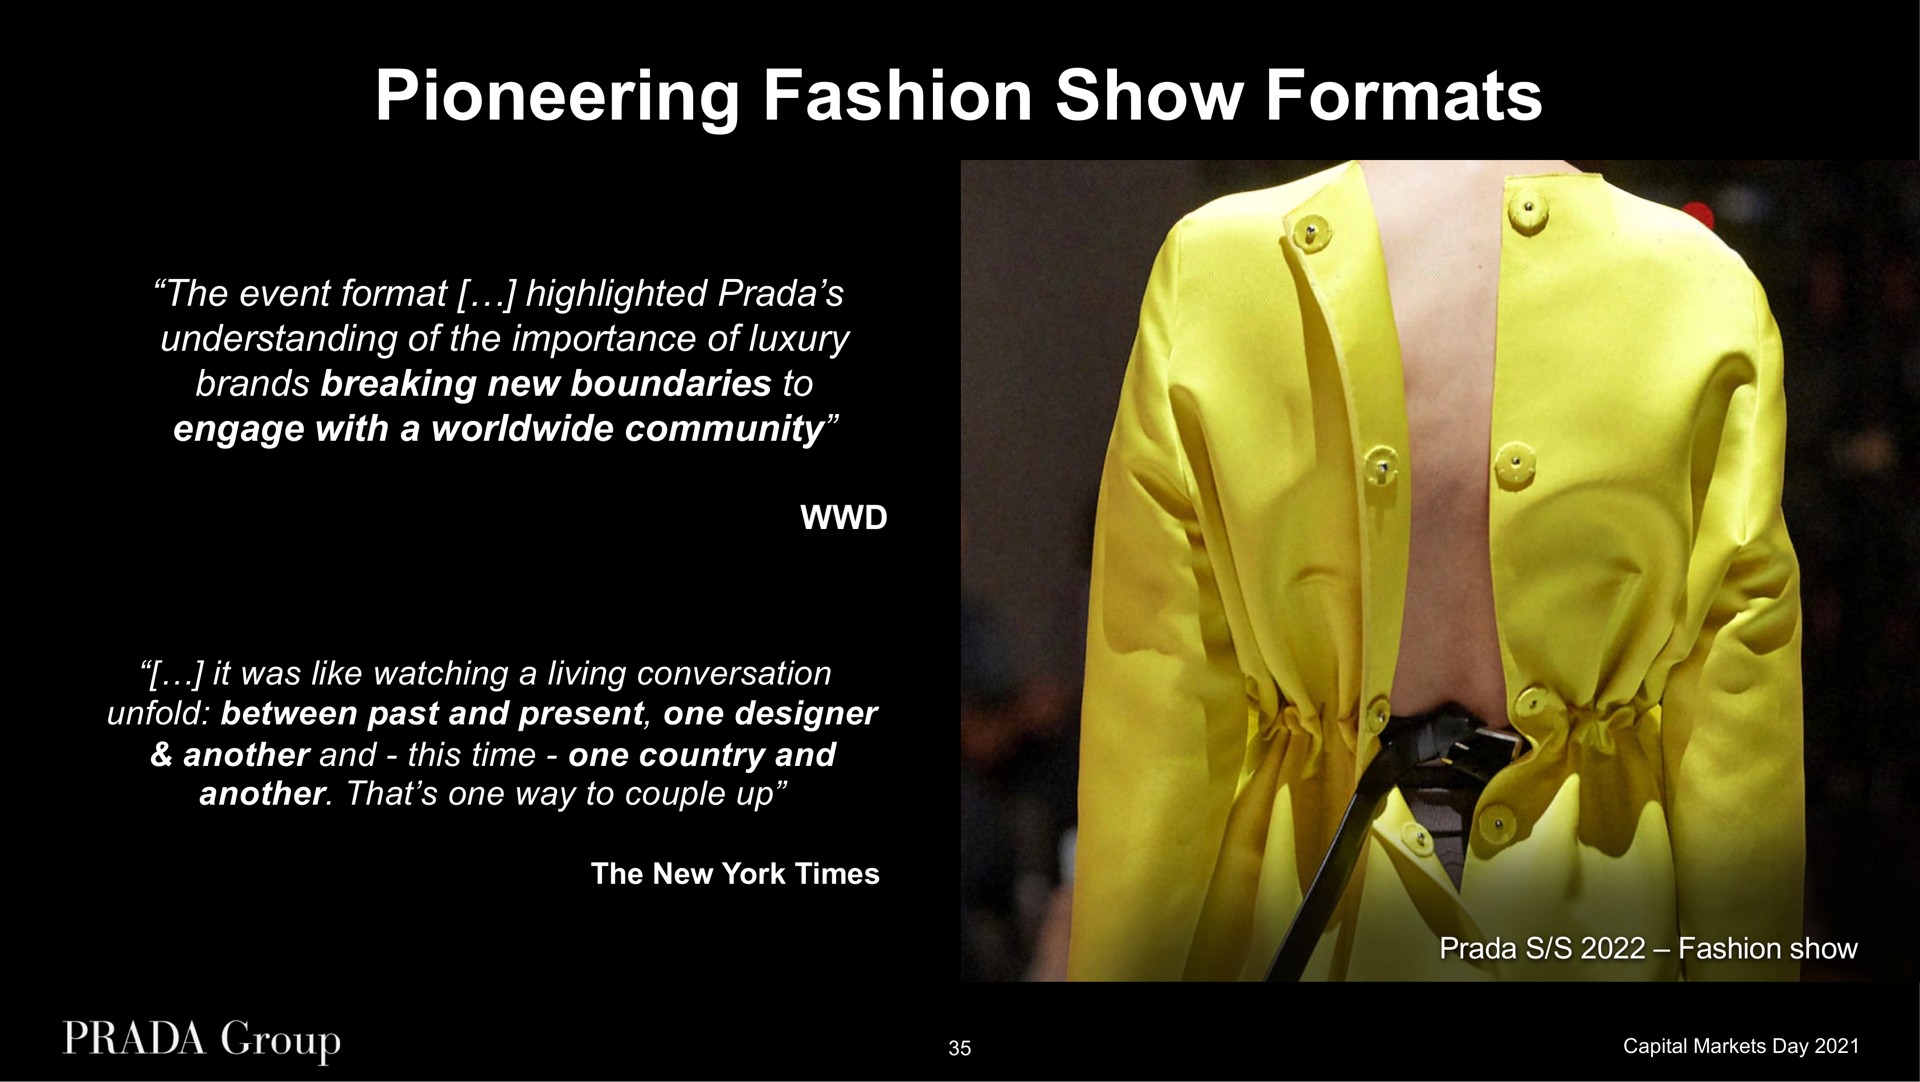 pioneering fashion show formats the event format highlighted understanding of the importance of luxury brands breaking new boundaries to engage with a community it was like watching a living conversation unfold between past and present one designer another and this time one country and another that one way to couple up the new york times fashion show | Prada